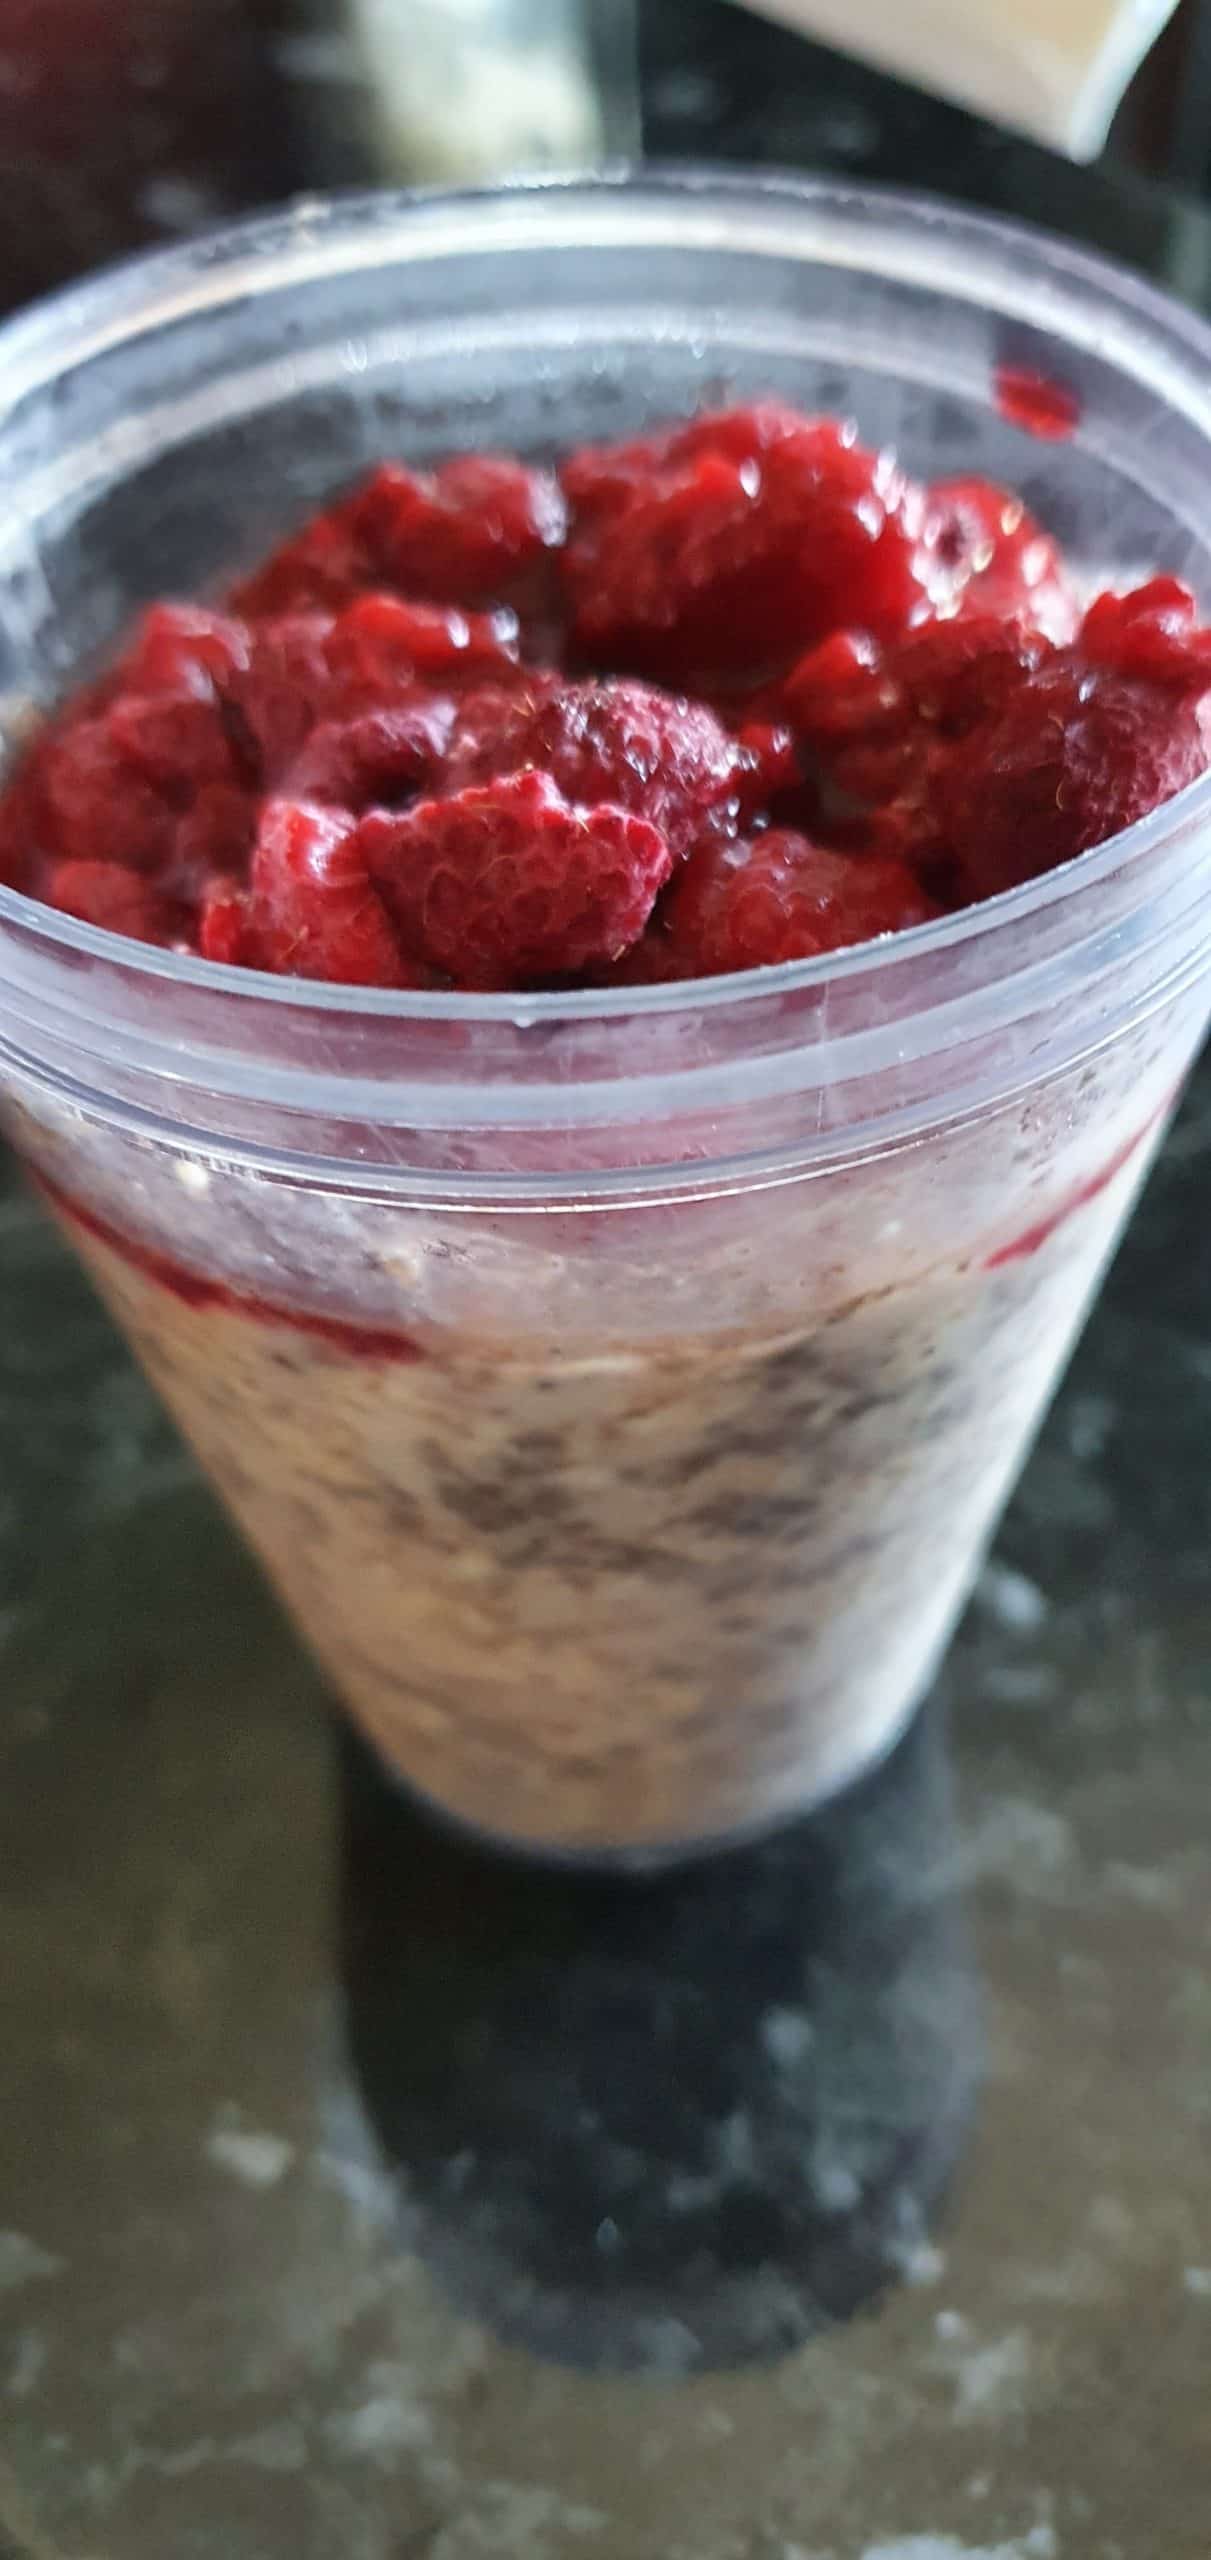 You are currently viewing Overnight oats